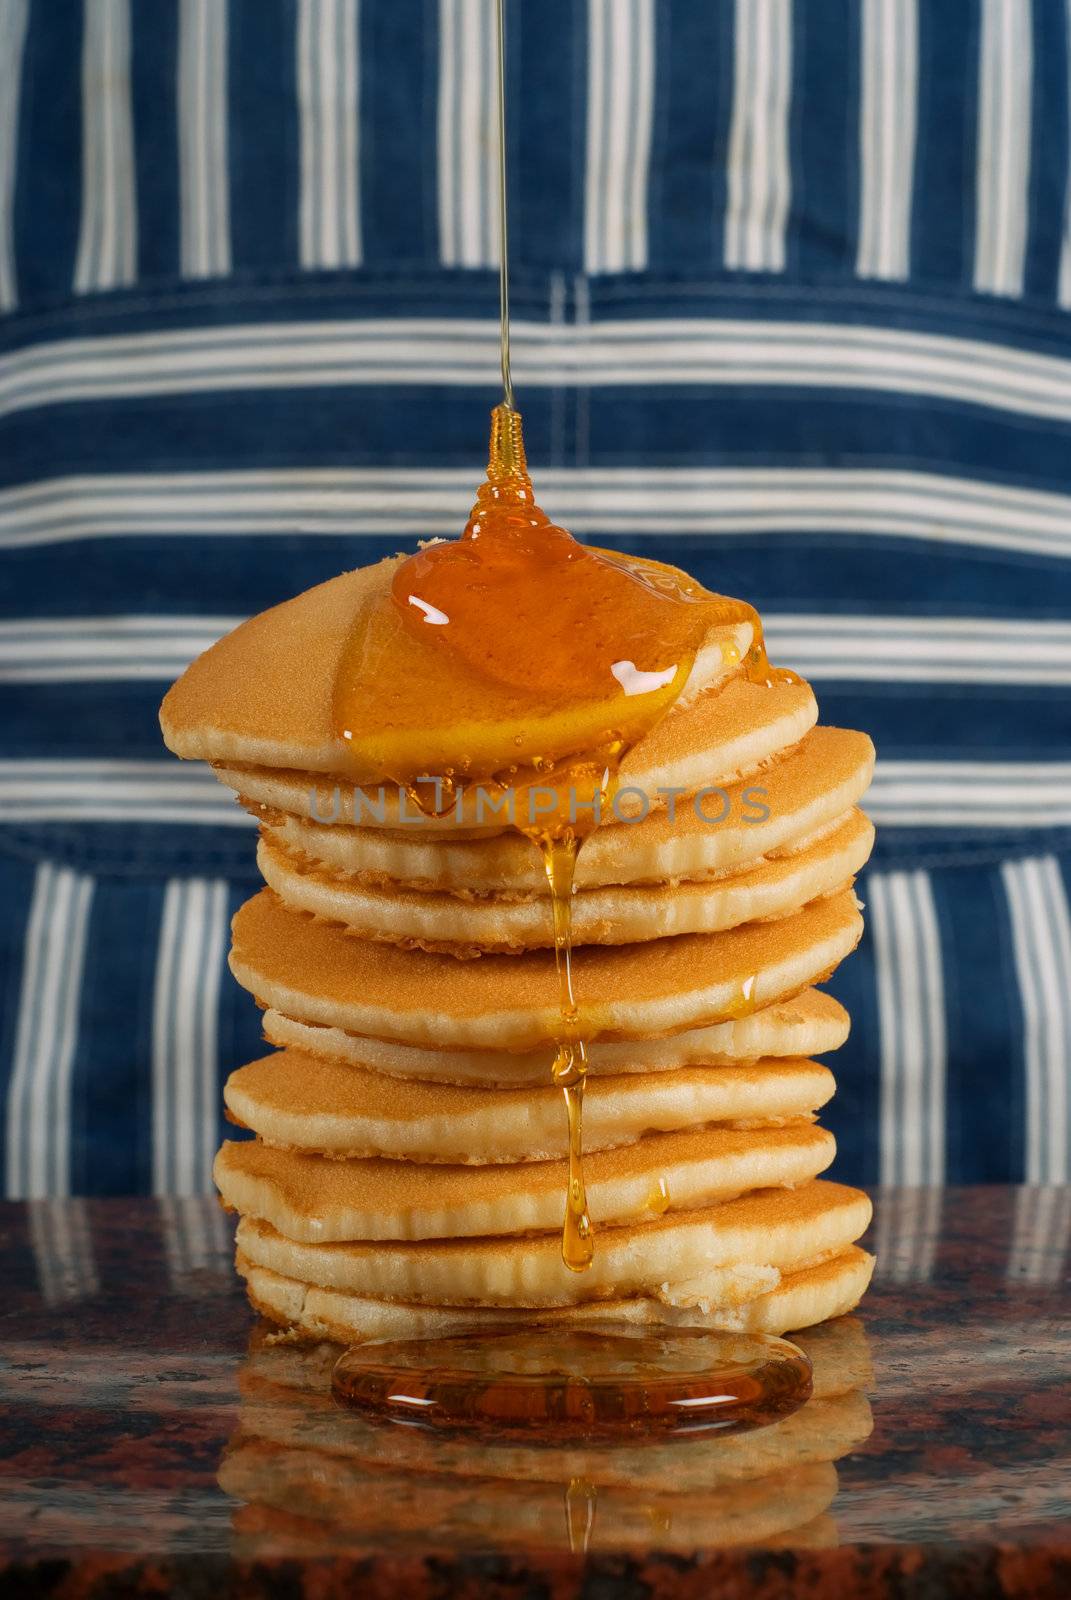 Pouring syrup on flapjacks by alistaircotton